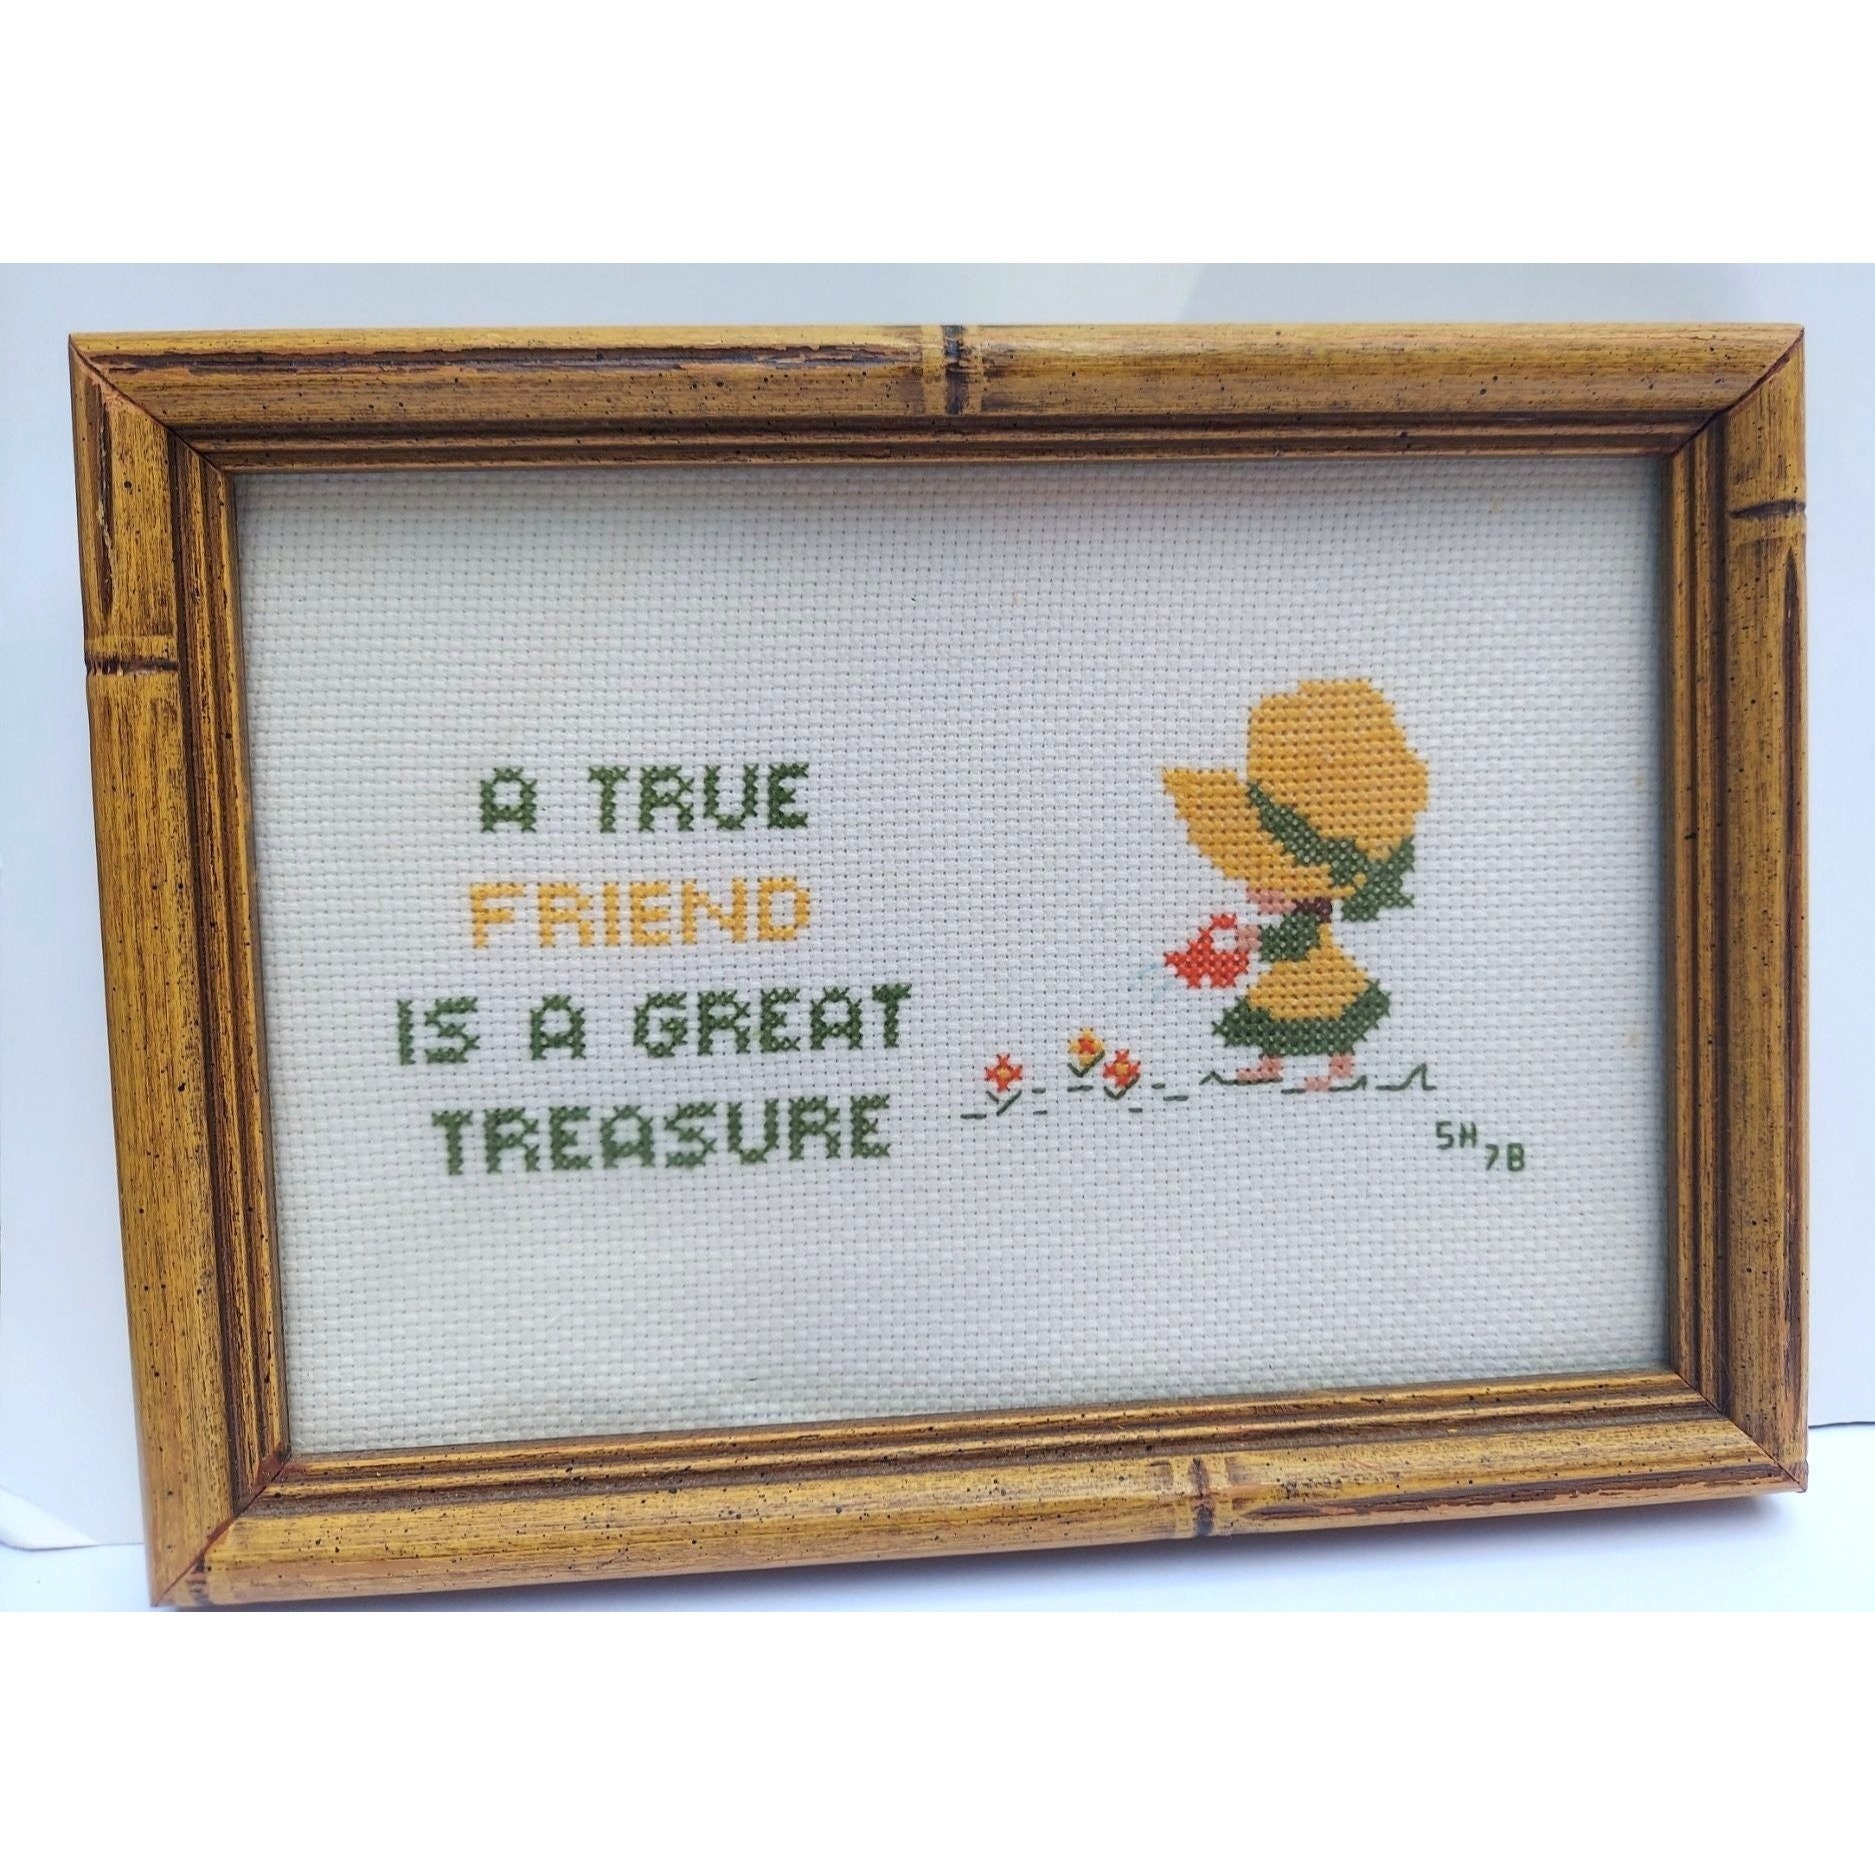 Cross Stitch Kit ~ Gold Collection Treasured Friend Flower & Lace